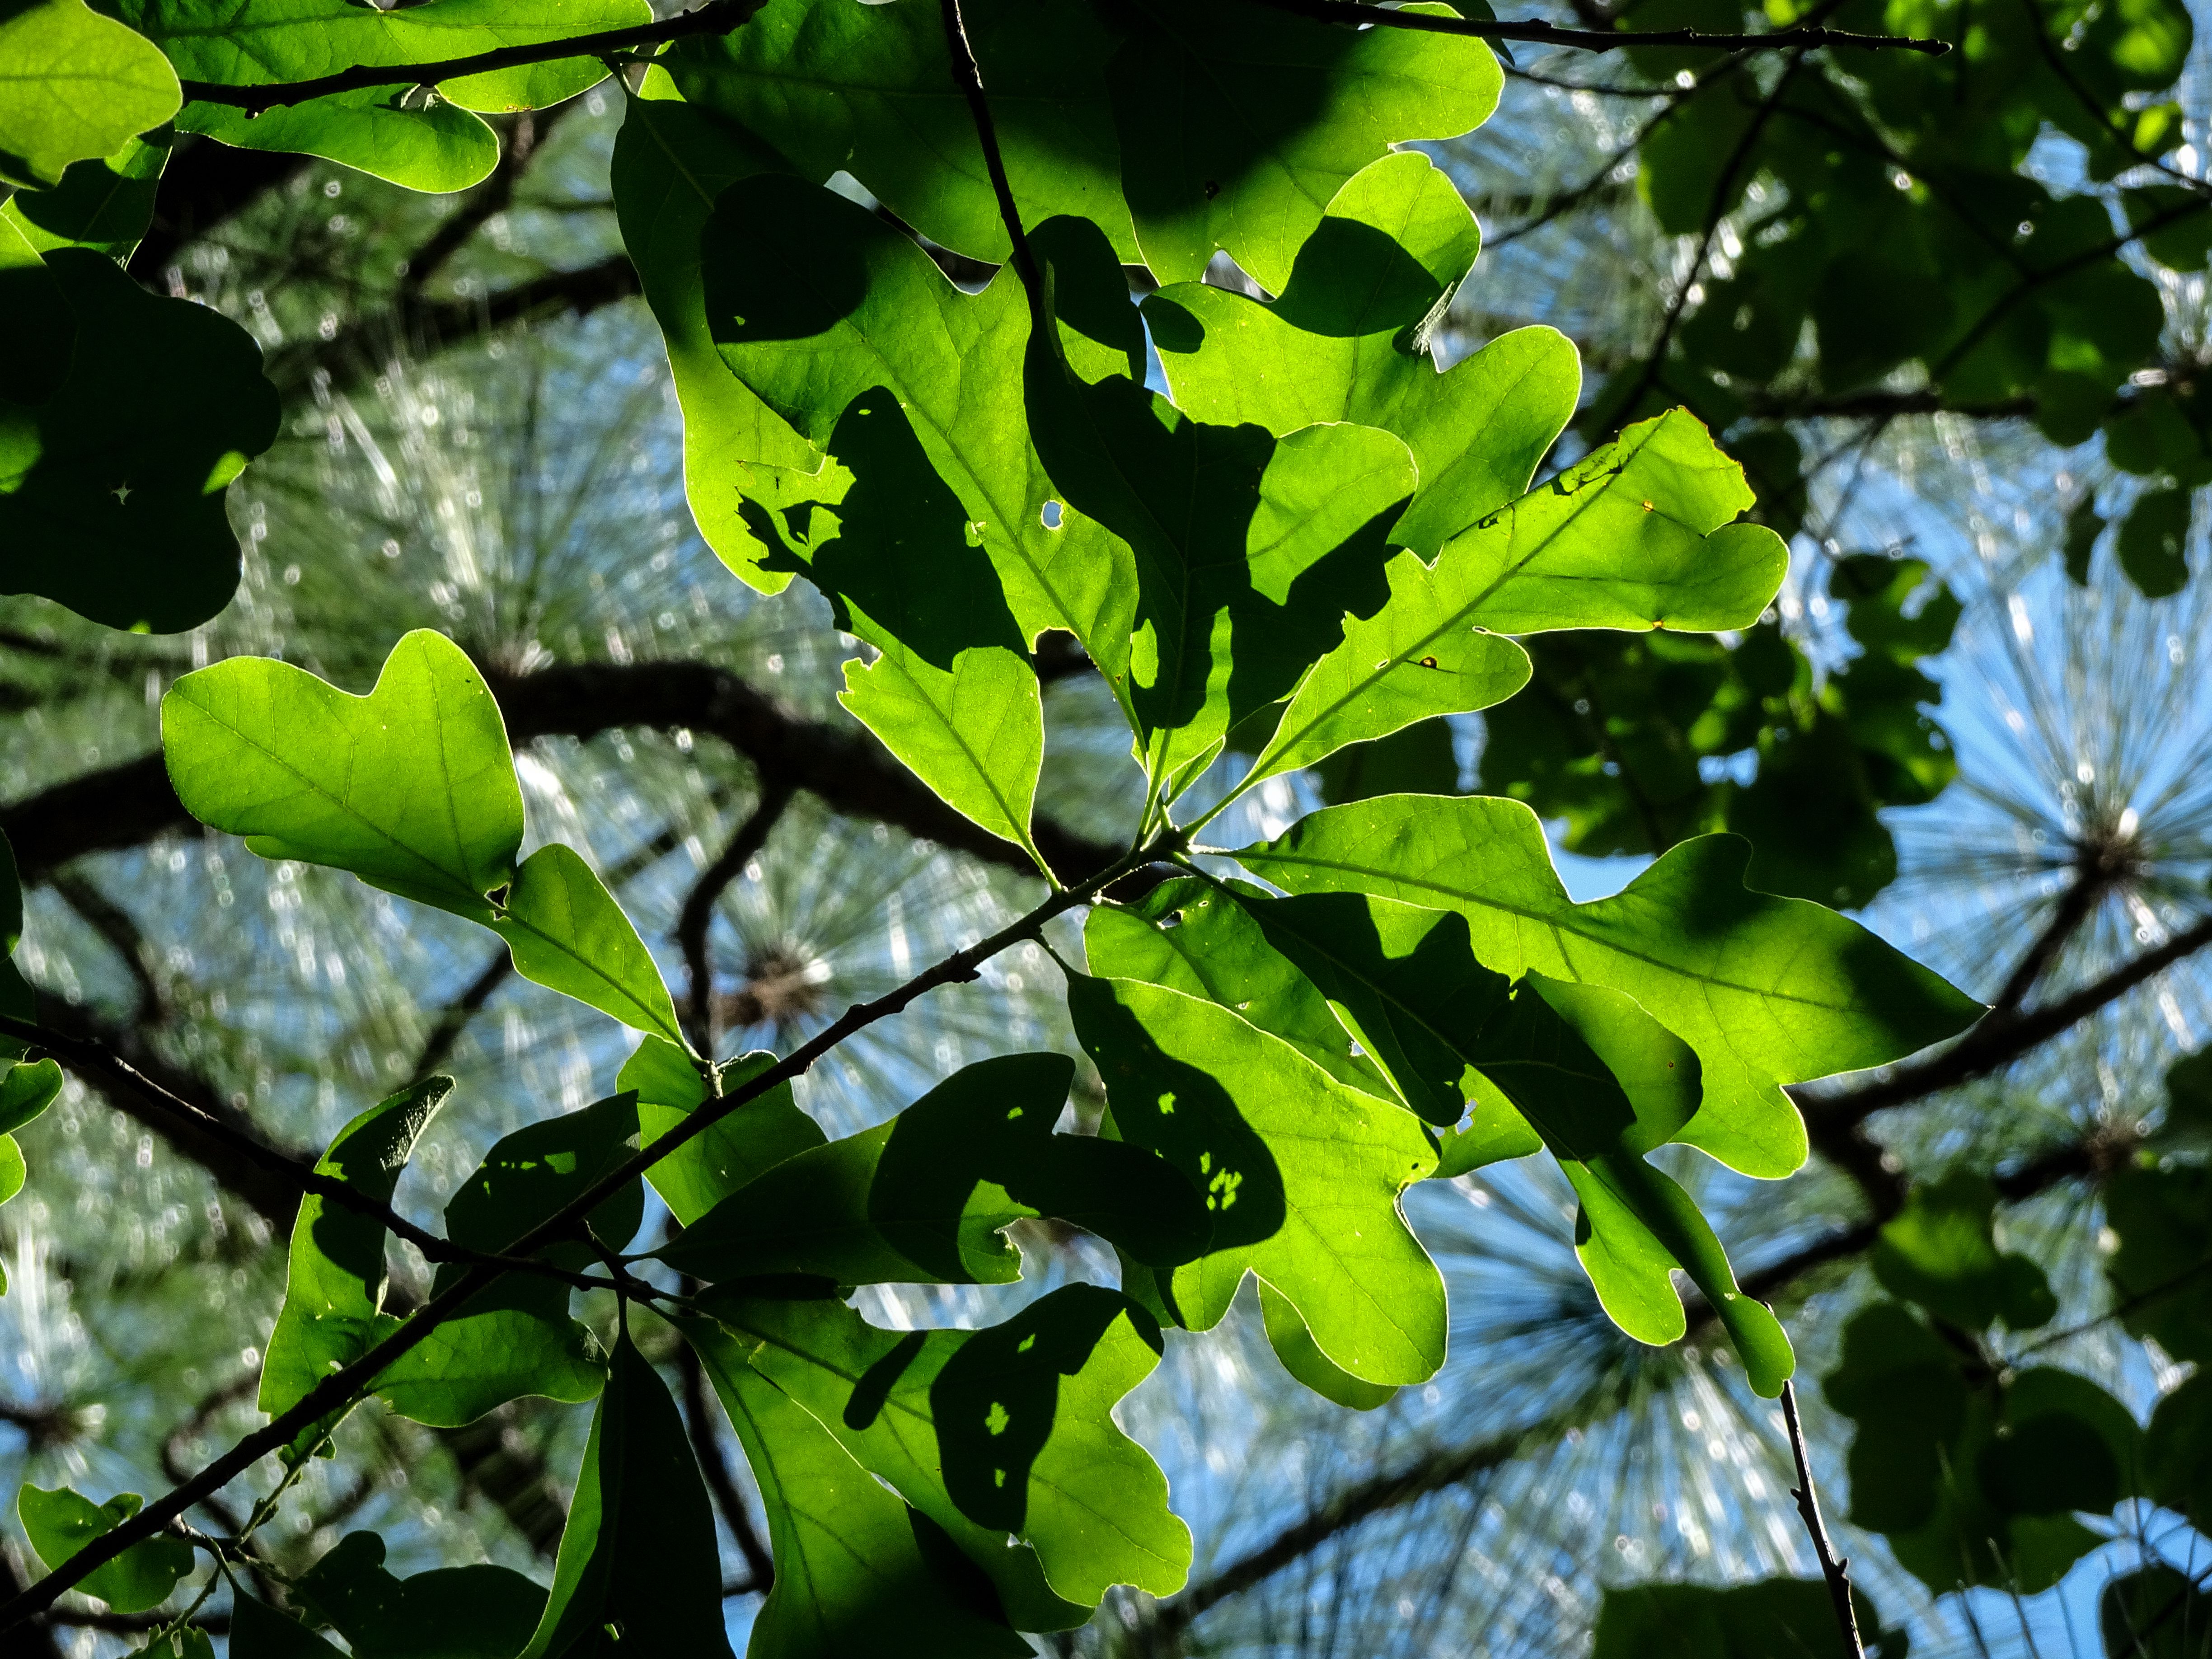 Underside of leaves with sun shining through from above